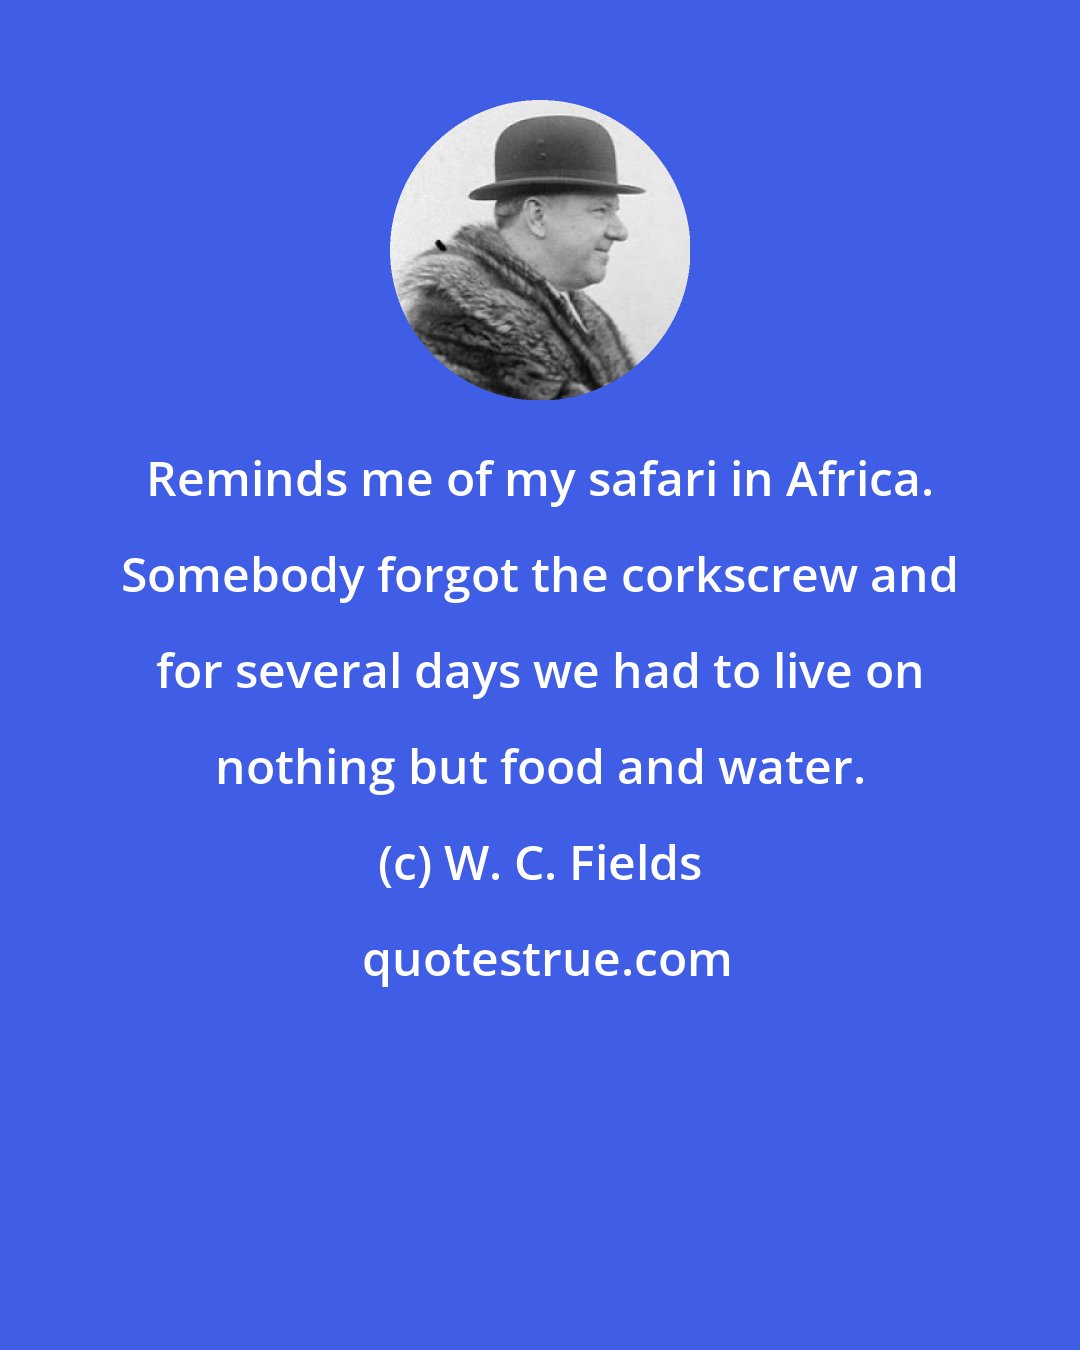 W. C. Fields: Reminds me of my safari in Africa. Somebody forgot the corkscrew and for several days we had to live on nothing but food and water.